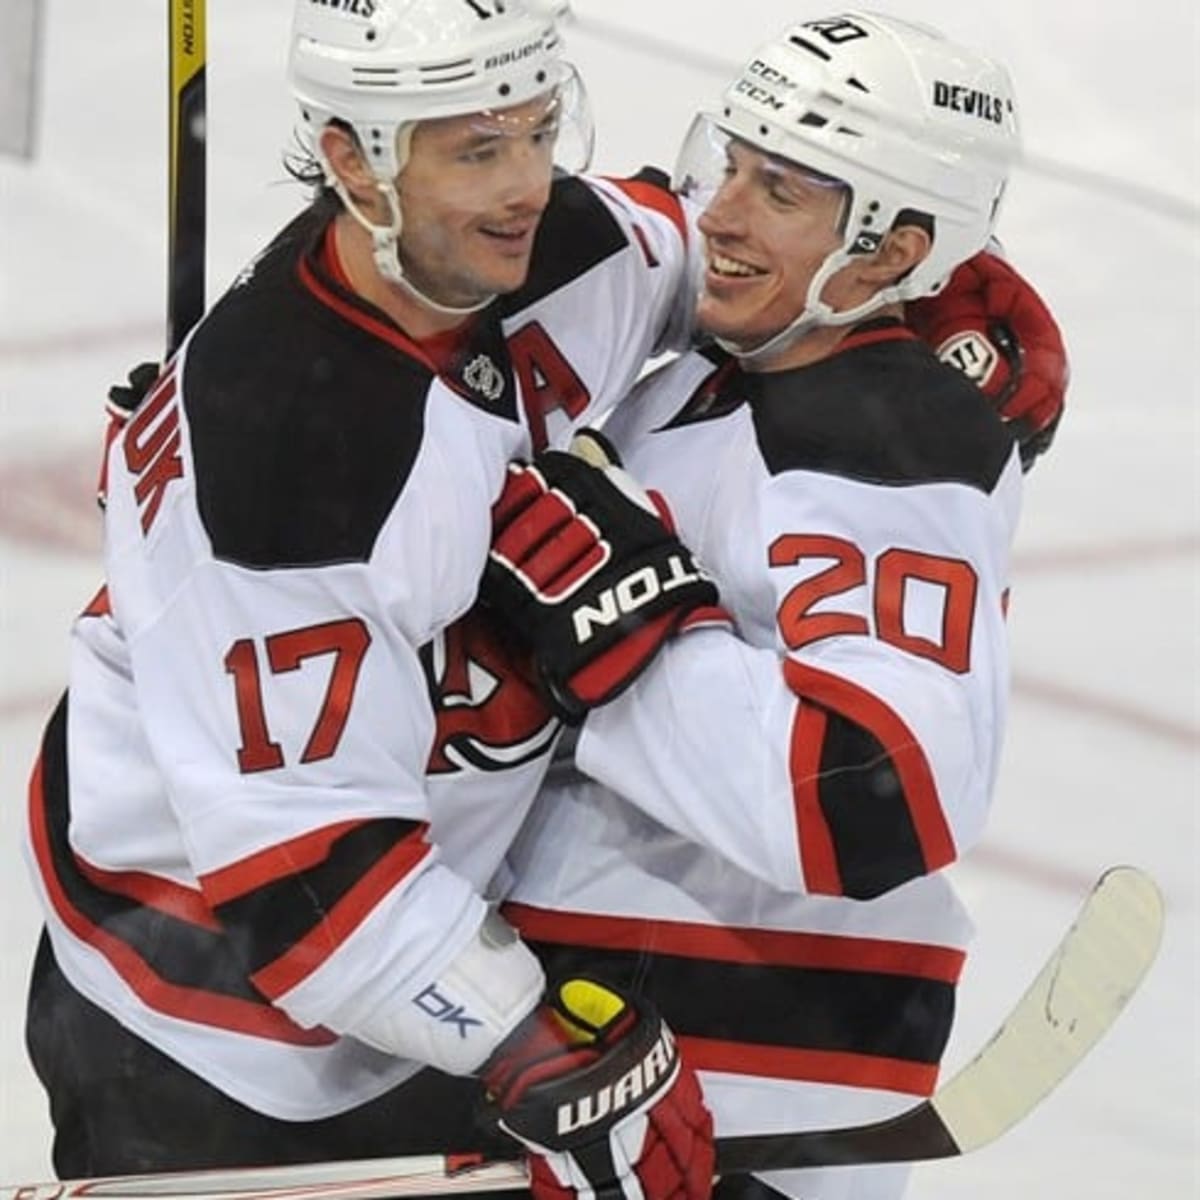 Were New Jersey Devils Actually Better Off Without Zach Parise?